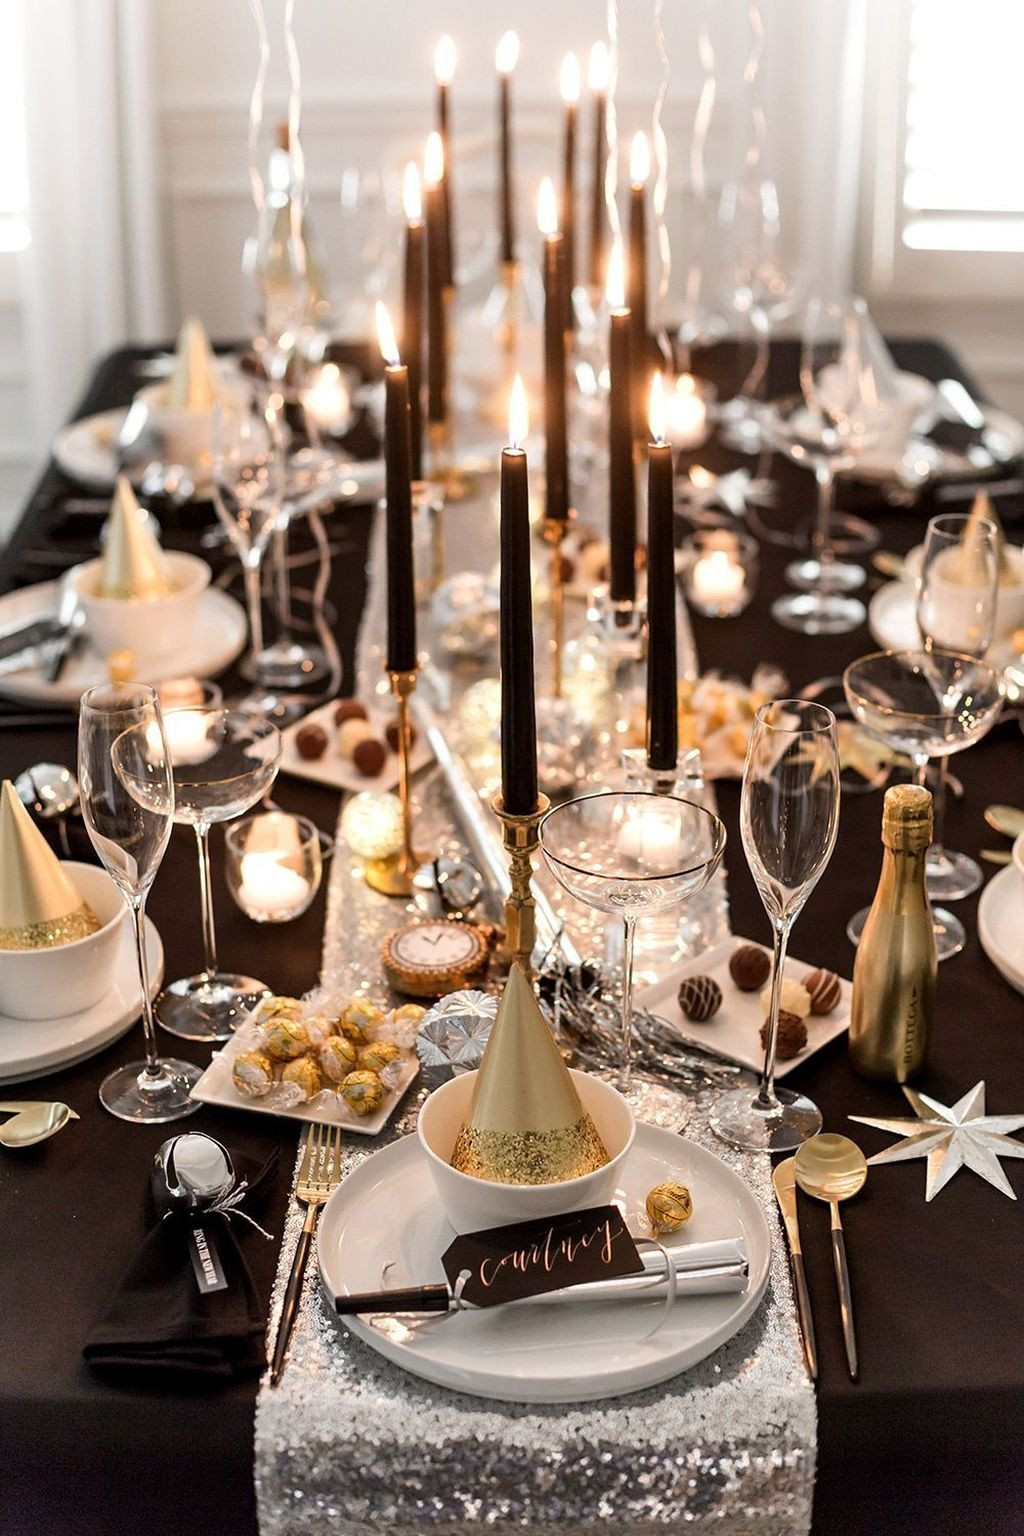 New Years Eve Dinner Ideas
 30 Stylish New Years Eve Table Decoration Ideas For NYE